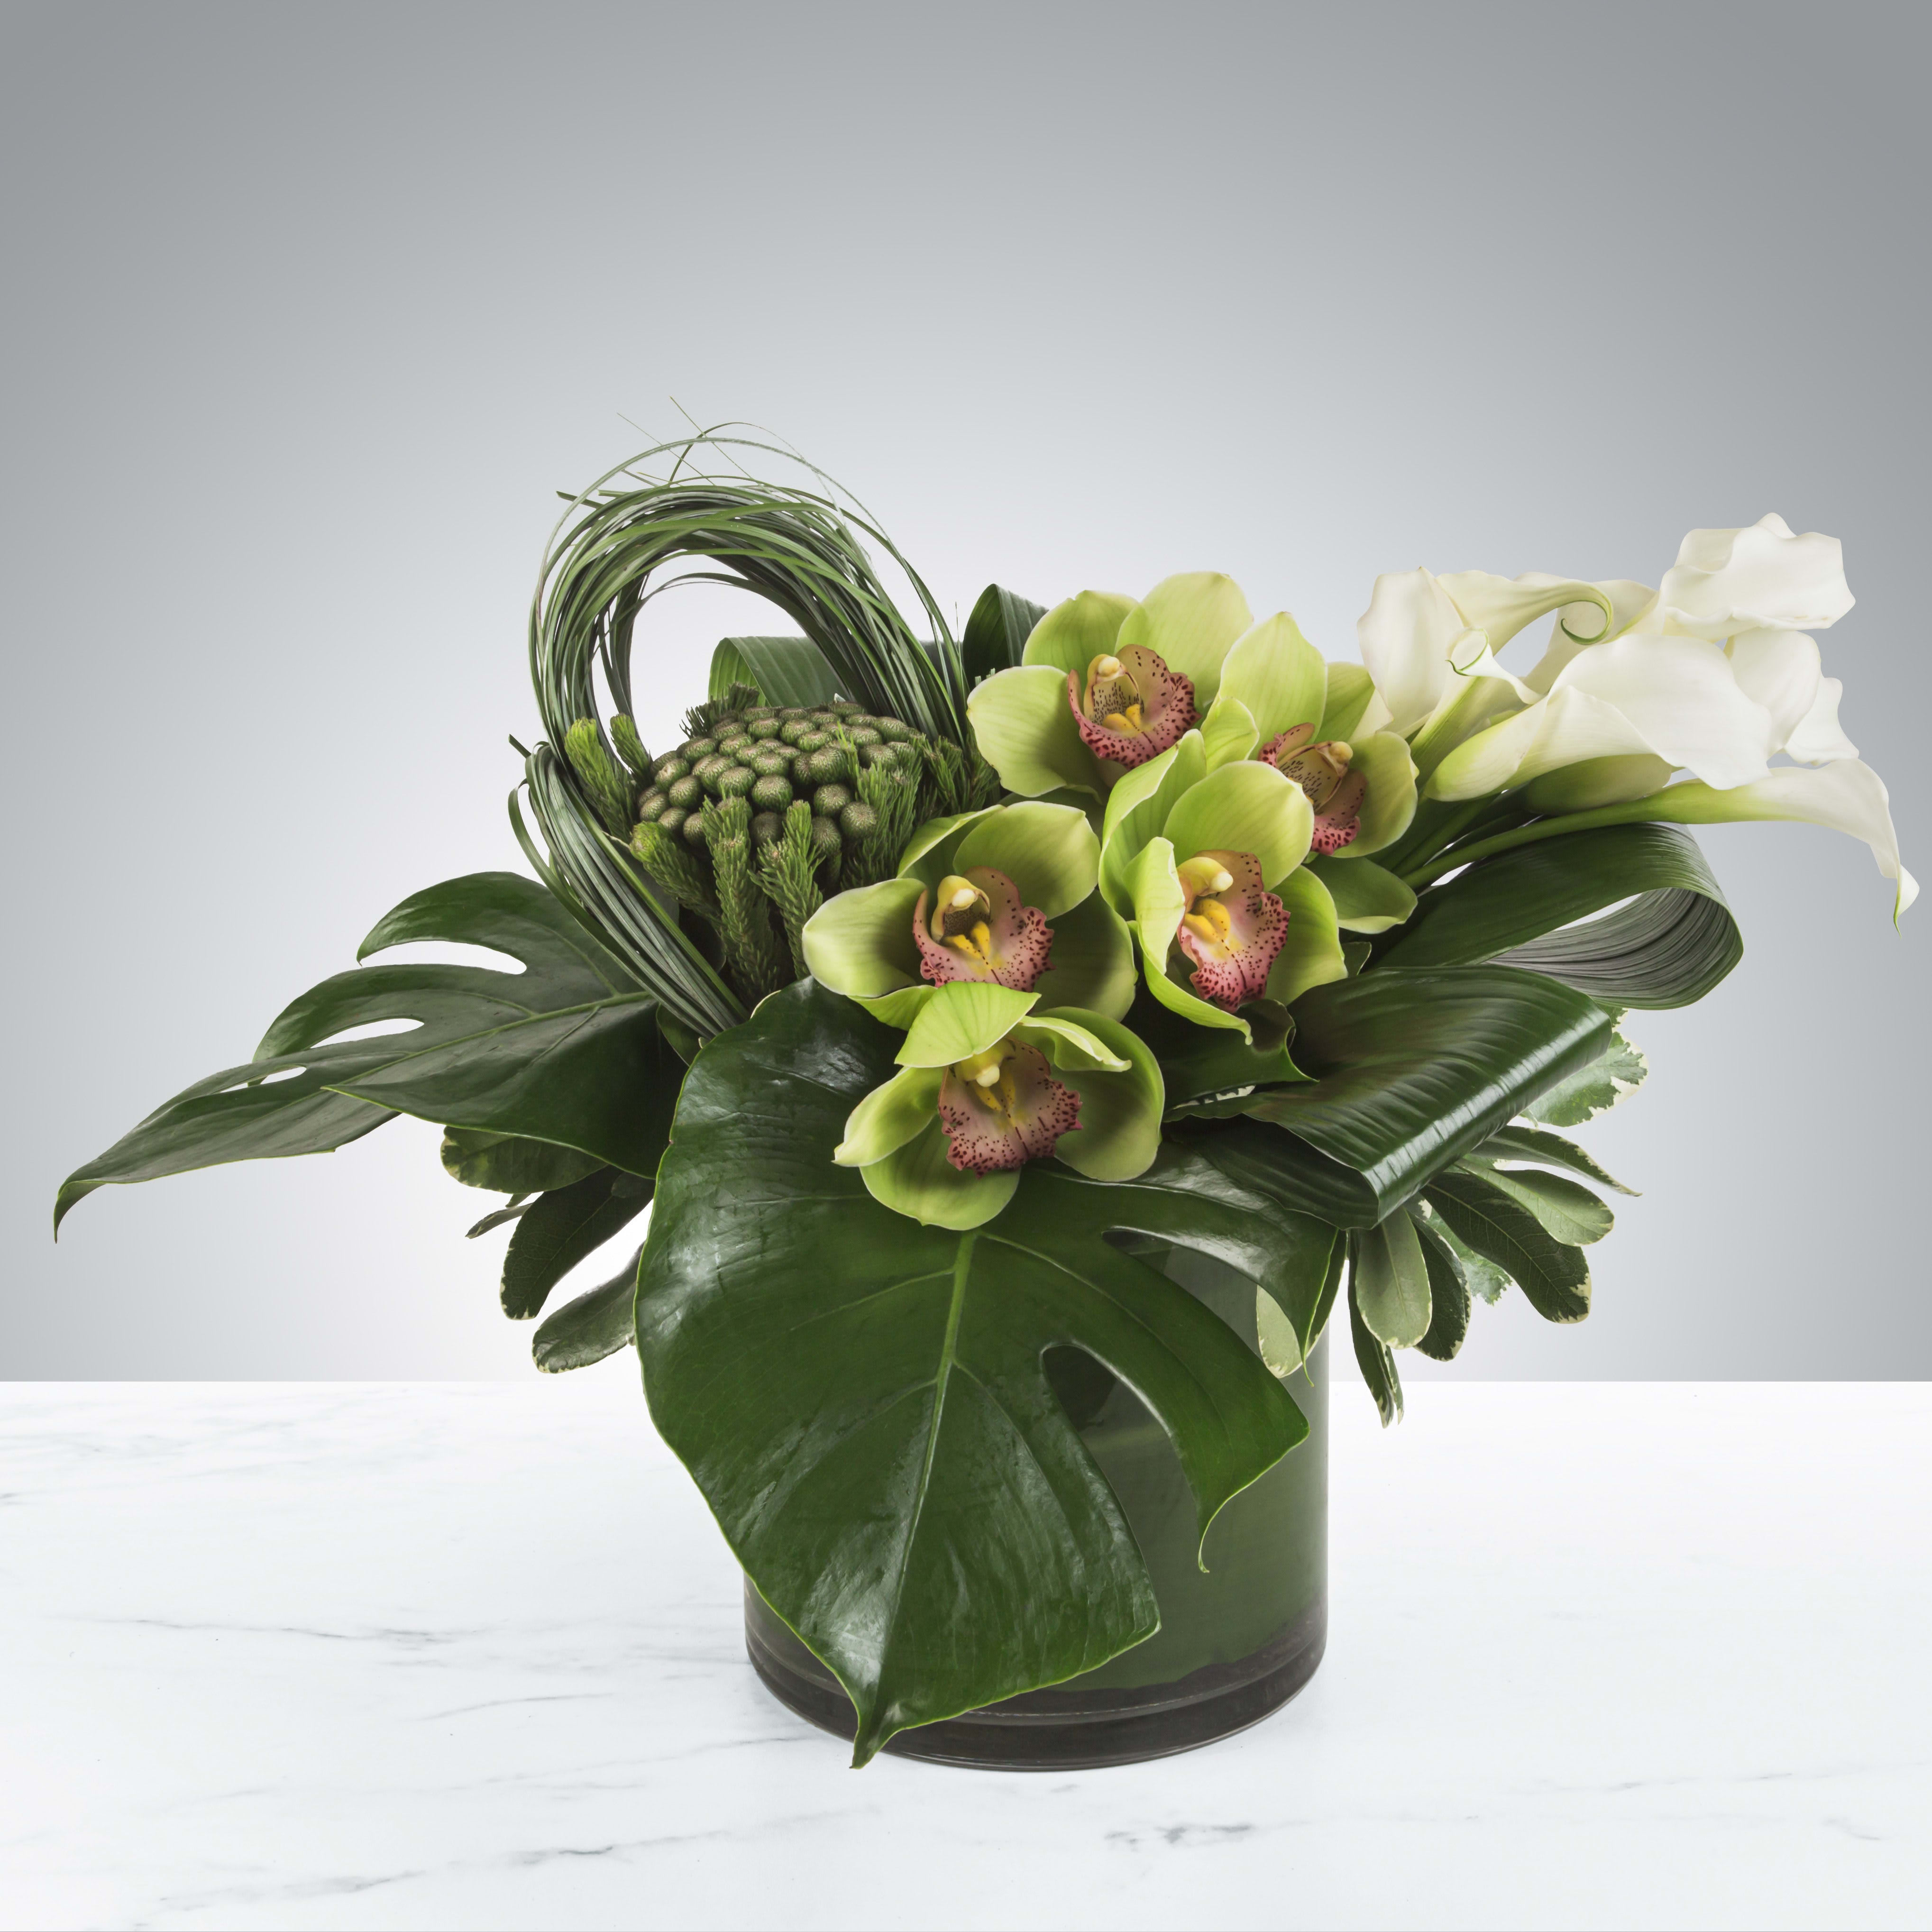 Regards by BloomNation™ - Introducing &quot;Regards&quot; by BloomNation, an exquisite floral arrangement that exudes elegance and sophistication. This stunning arrangement features a harmonious blend of green cymbidium orchids and white mini calla lilies, carefully handcrafted to create a truly remarkable display.  Green cymbidium orchids are known for their striking beauty and graceful allure. With their vibrant green hues and delicate petals, these orchids symbolize luxury and refinement. Paired with white mini calla lilies, which represent purity and innocence, this arrangement creates a captivating contrast that captures attention and admiration.  Every element of &quot;Regards&quot; has been thoughtfully considered by our skilled florists. The lush green cymbidium orchids provide a lush backdrop, their vibrant colors adding depth and texture to the arrangement. The elegant white mini calla lilies take center stage, their slender stems and graceful blooms creating a sense of delicate beauty.  Whether you're sending &quot;Regards&quot; for a special occasion, a corporate event, or as a thoughtful gesture, this arrangement is sure to impress. Its timeless beauty makes it suitable for any recipient and any setting, whether it be a birthday celebration, a wedding, or simply to show someone how much you care.